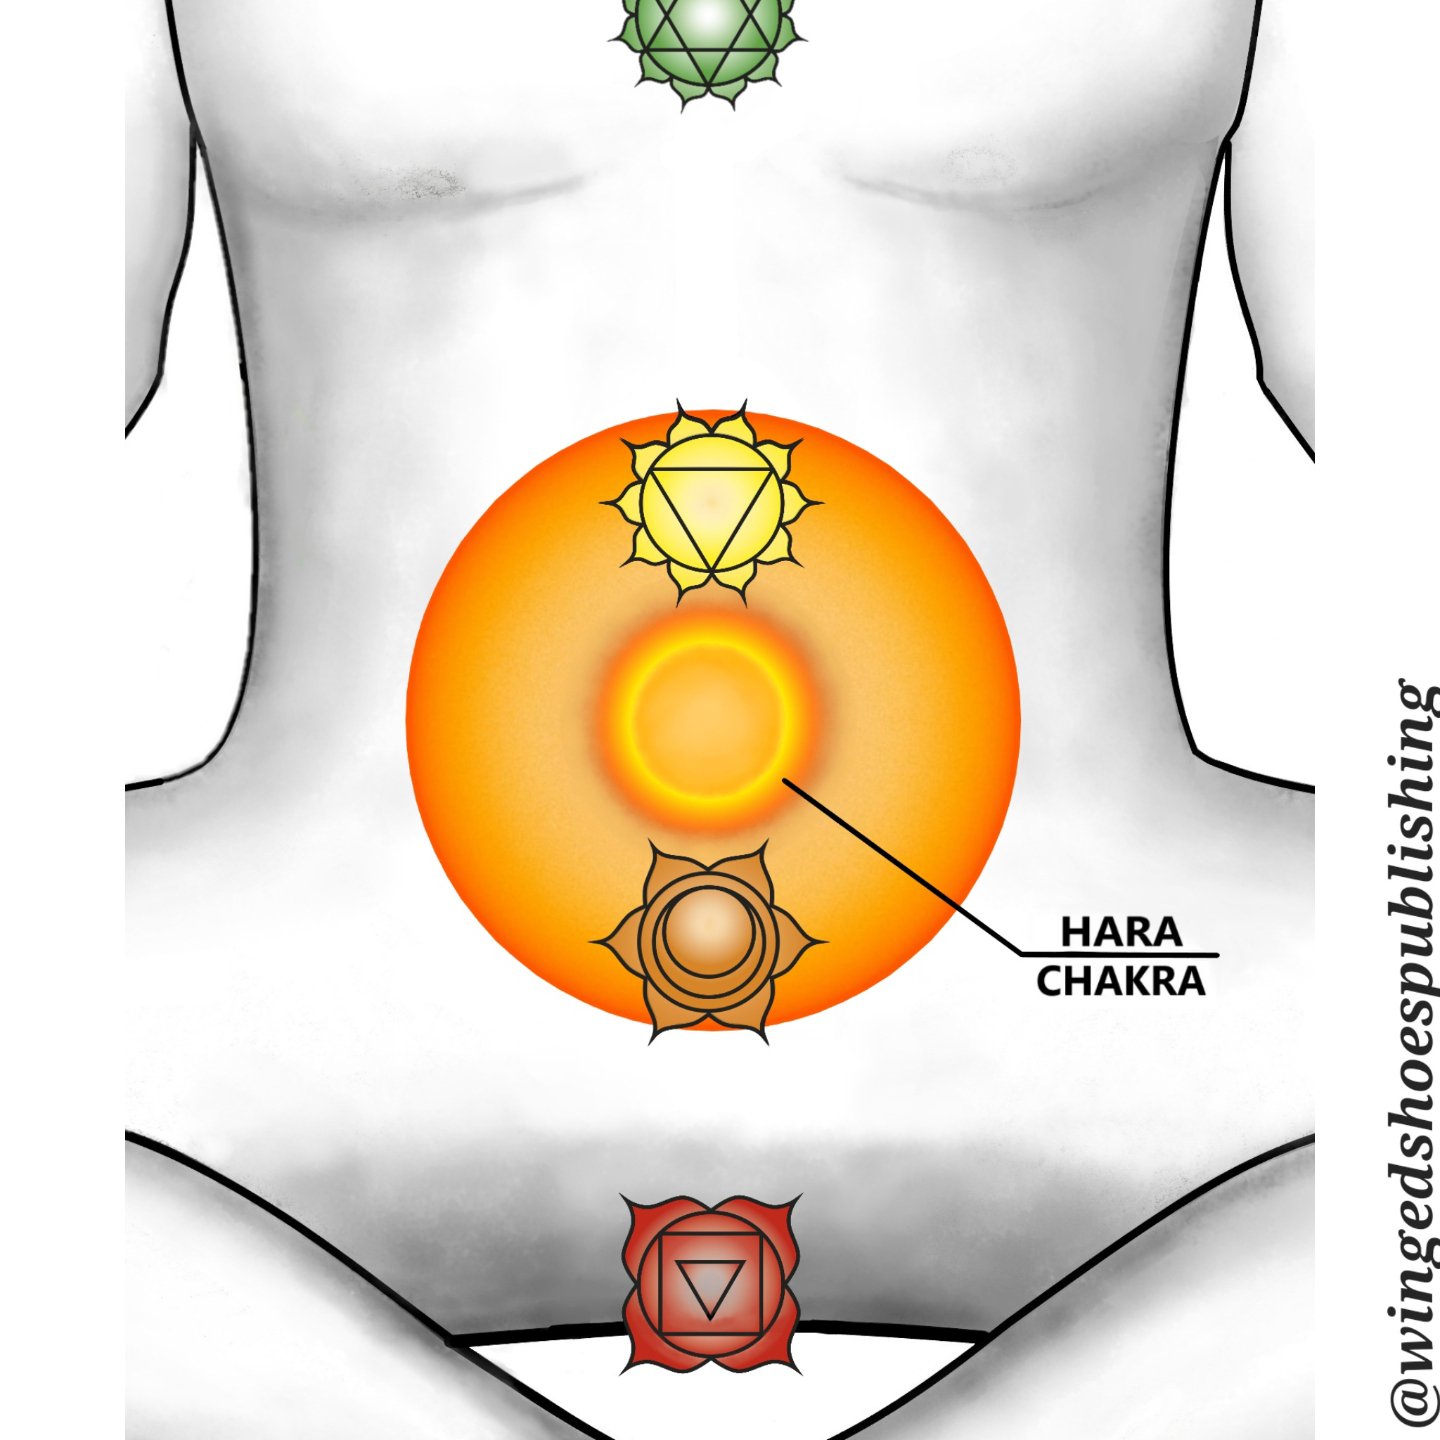 &quot;Hara is a Japanese word of Sanskrit origin (ahara-food) that means &quot;sea of energy.&quot; Its name is fitting since Hara Chakra acts as a gateway into the Astral Plane. Through this Plane, one can access all the inner Cosmic Planes. As such